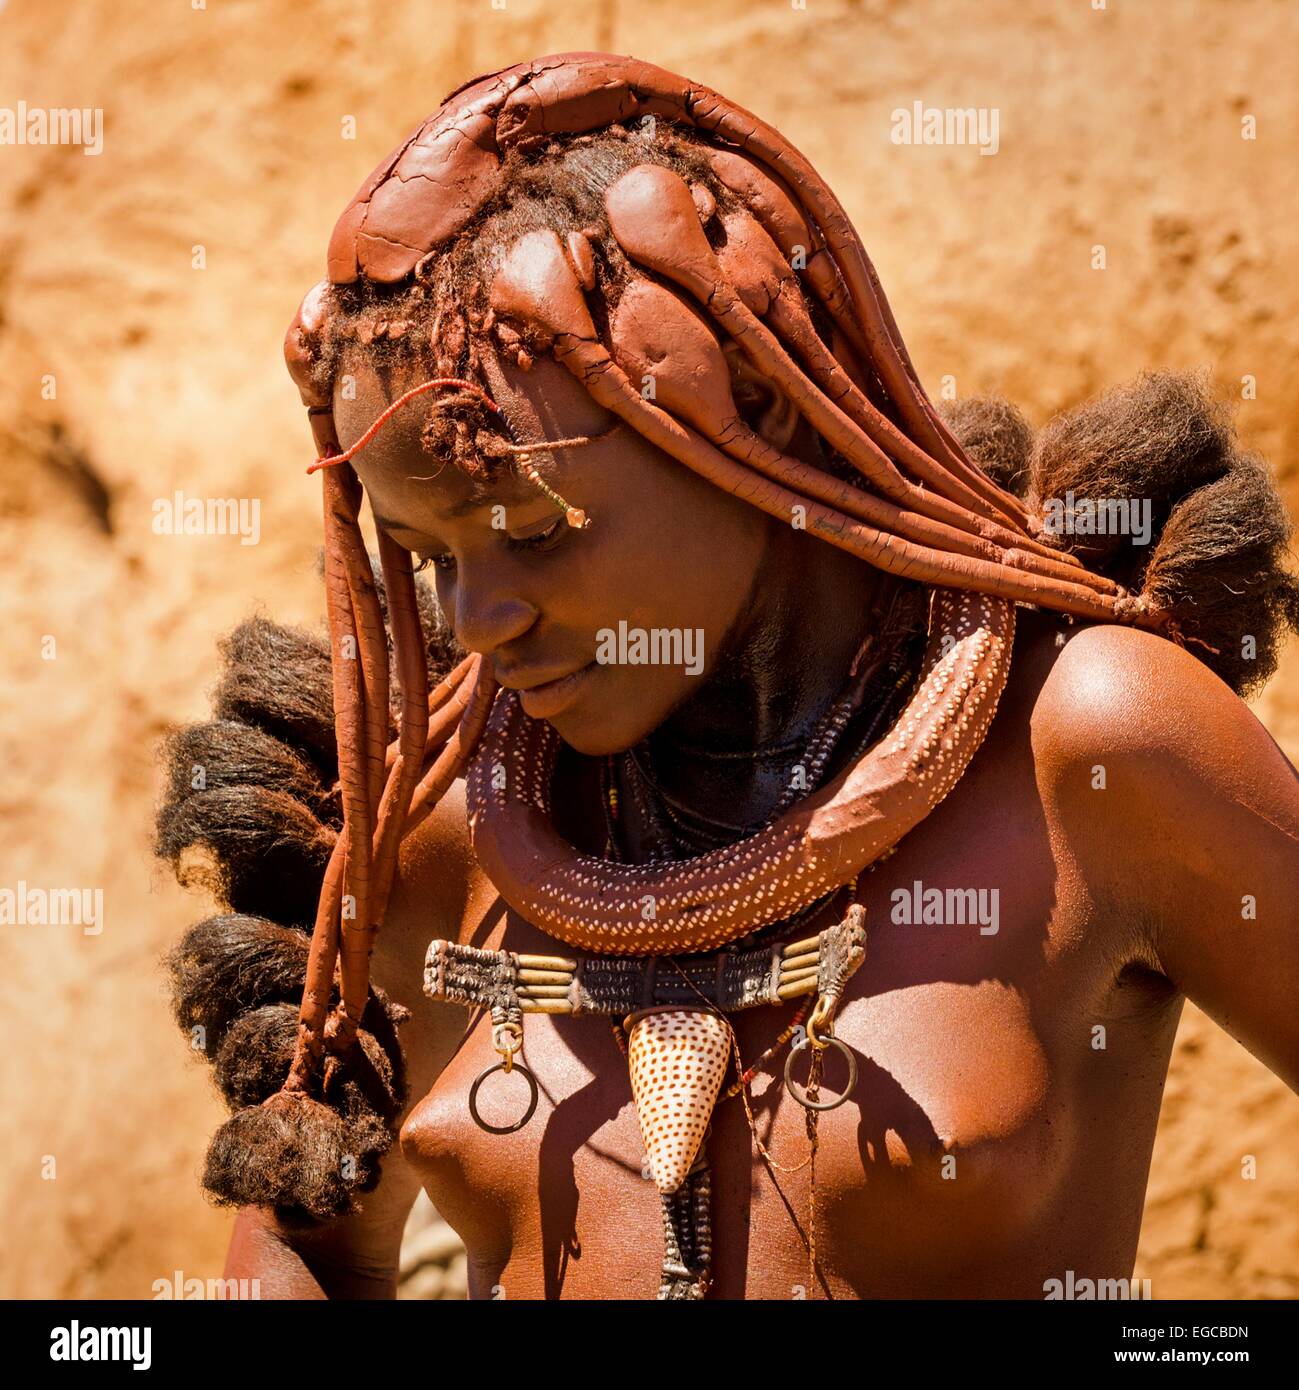 A young woman belonging to the indigenous Himba people pictured in her village in Kaokoland, Namibia, Africa. Stock Photo